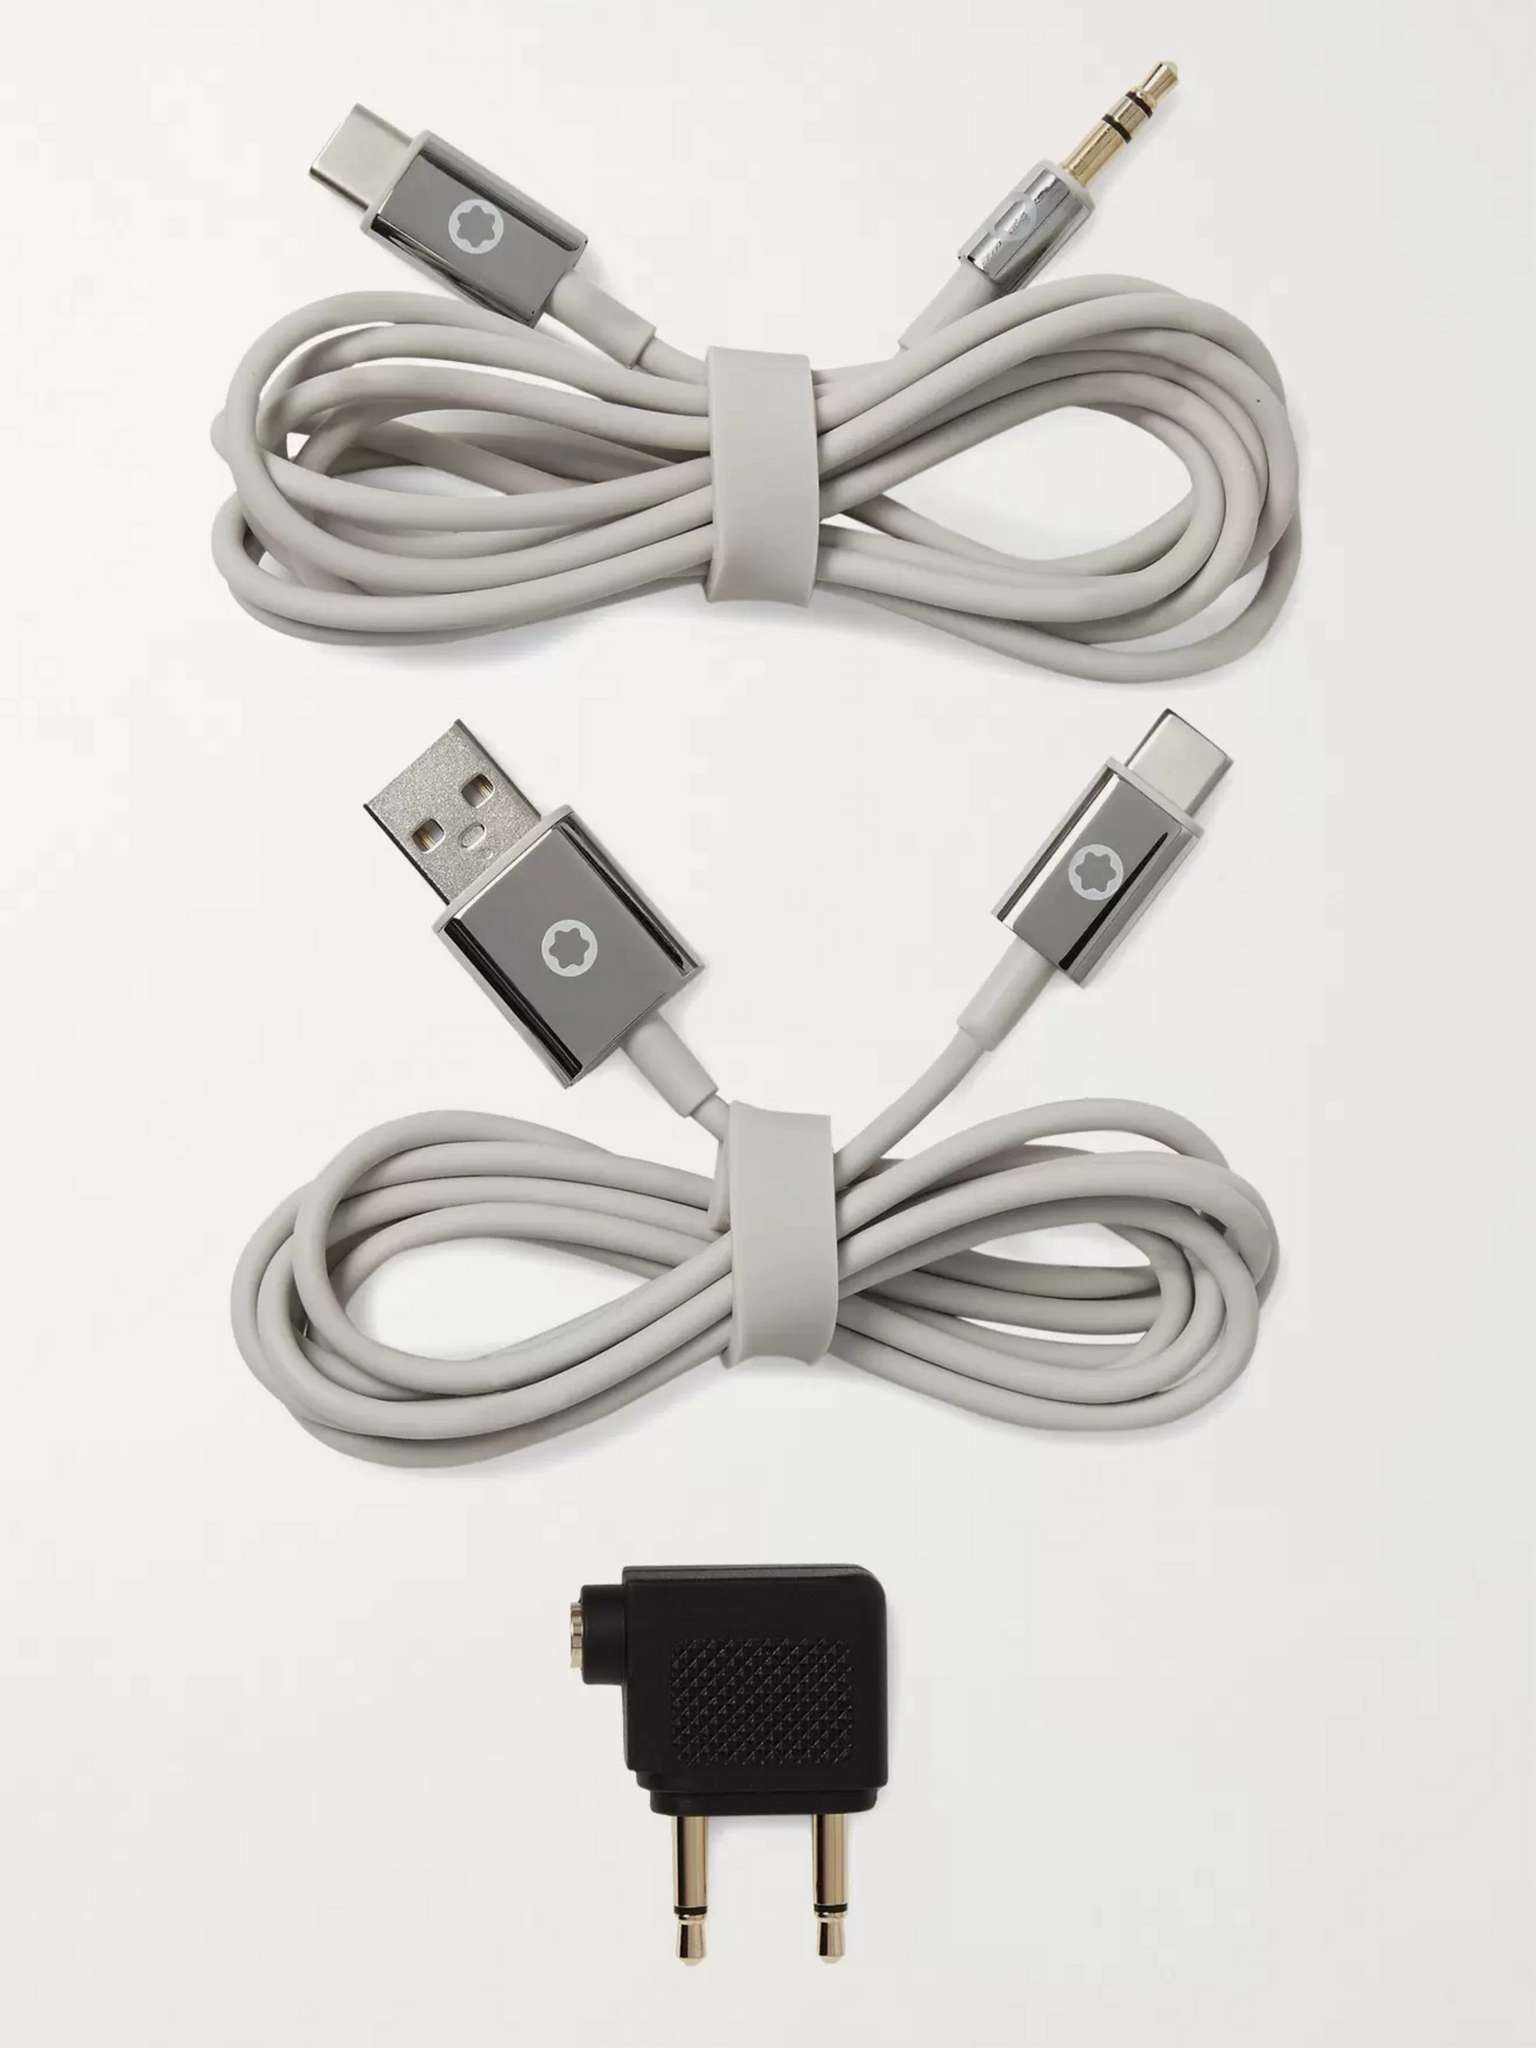 MB 01 Travel Charger and Cable Set - 1